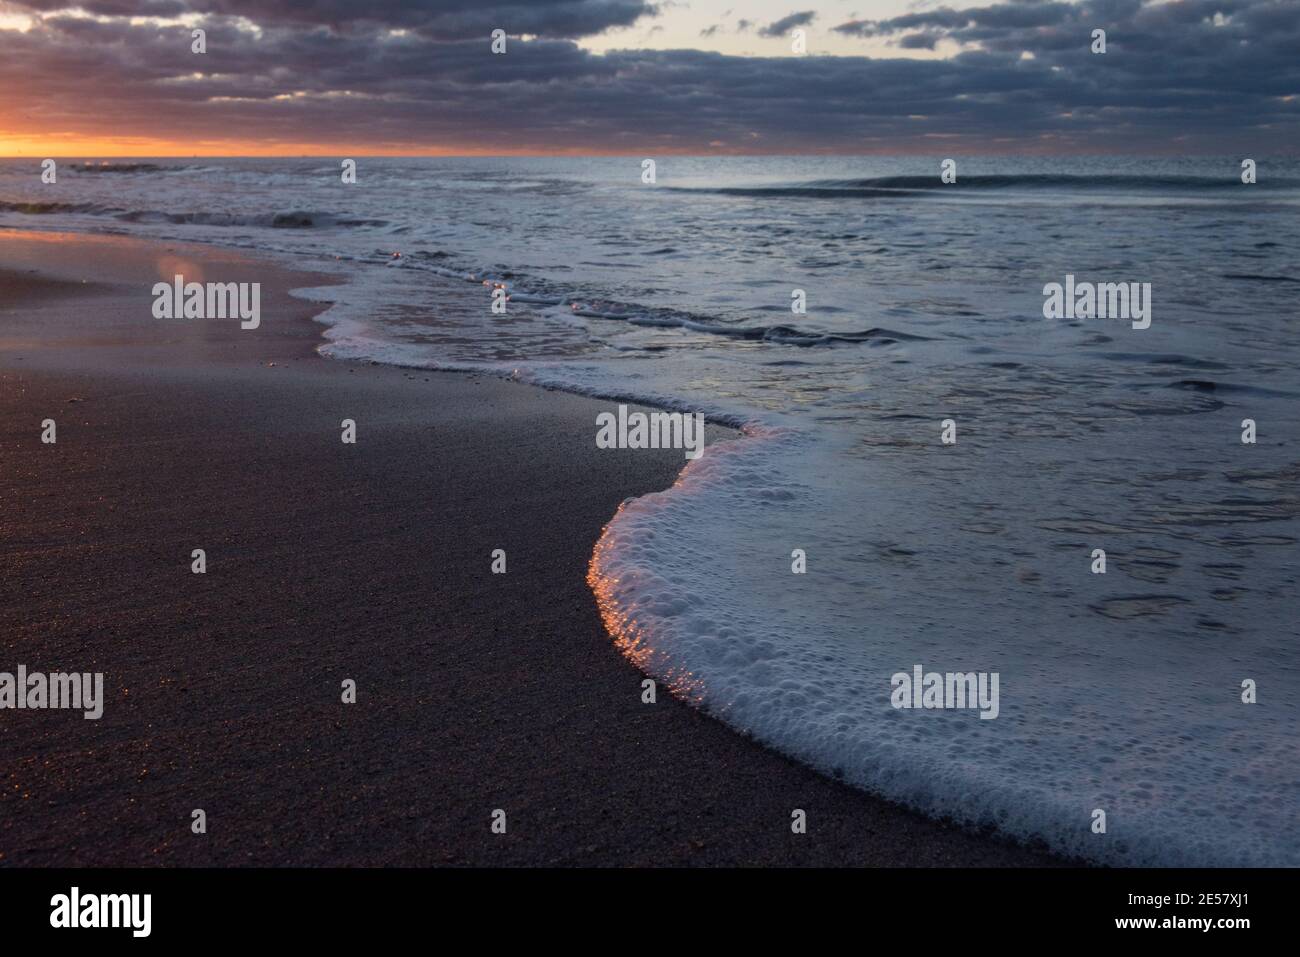 Sunlight glimmers on seafoam and the water's edge as a new day begins at Atlantic Beach, North Carolina. Stock Photo